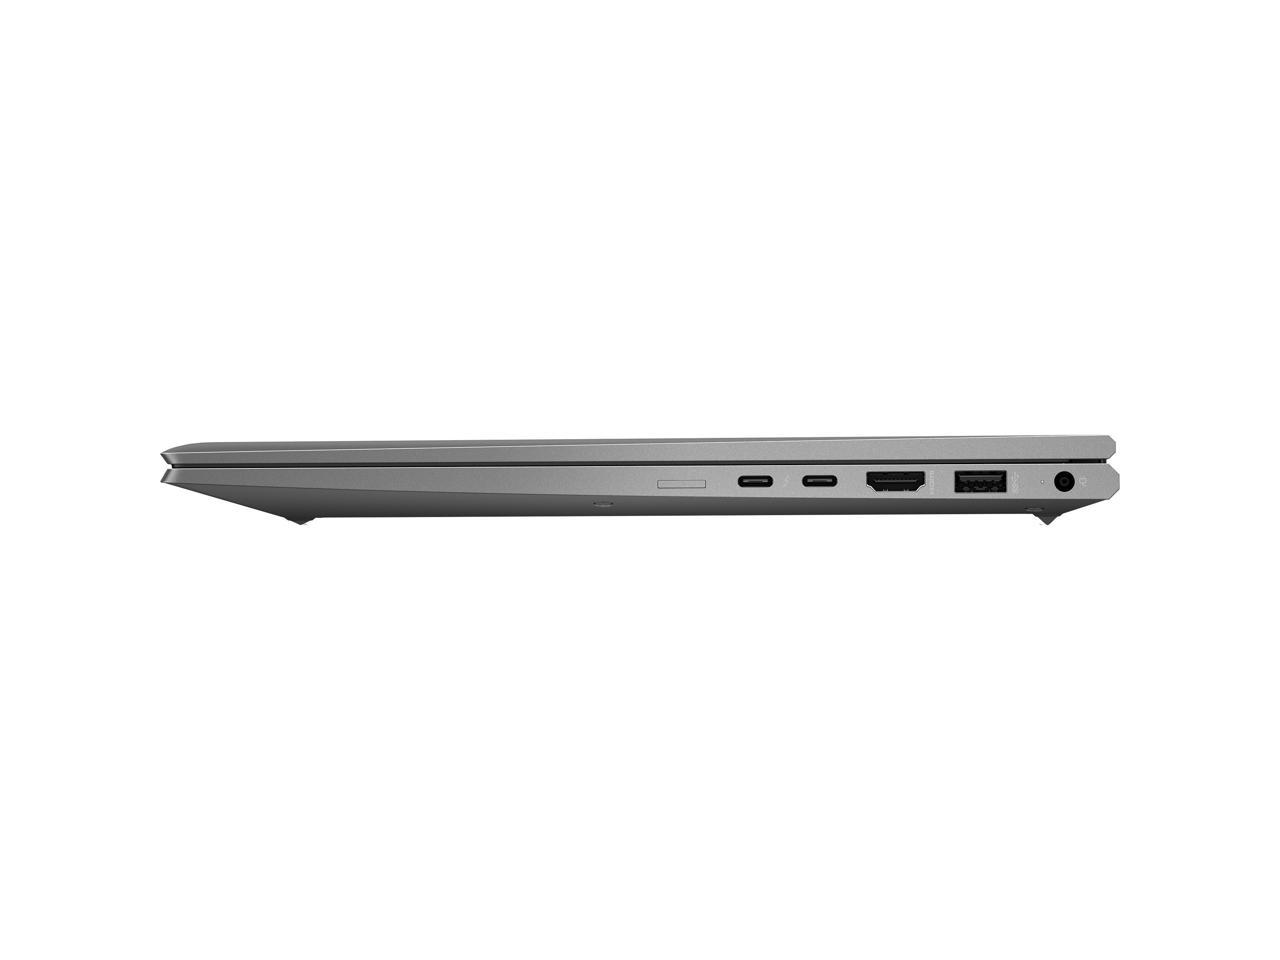 HP ZBook Firefly 15 G7 15.6" Mobile Workstation - Intel Core i7 (10th Gen) i7-10610U Quad-core (4 Core) 1.80 GHz - 32 GB RAM - 512 GB SSD - Windows 10 Pro - In-plane Switching (IPS) Technology -